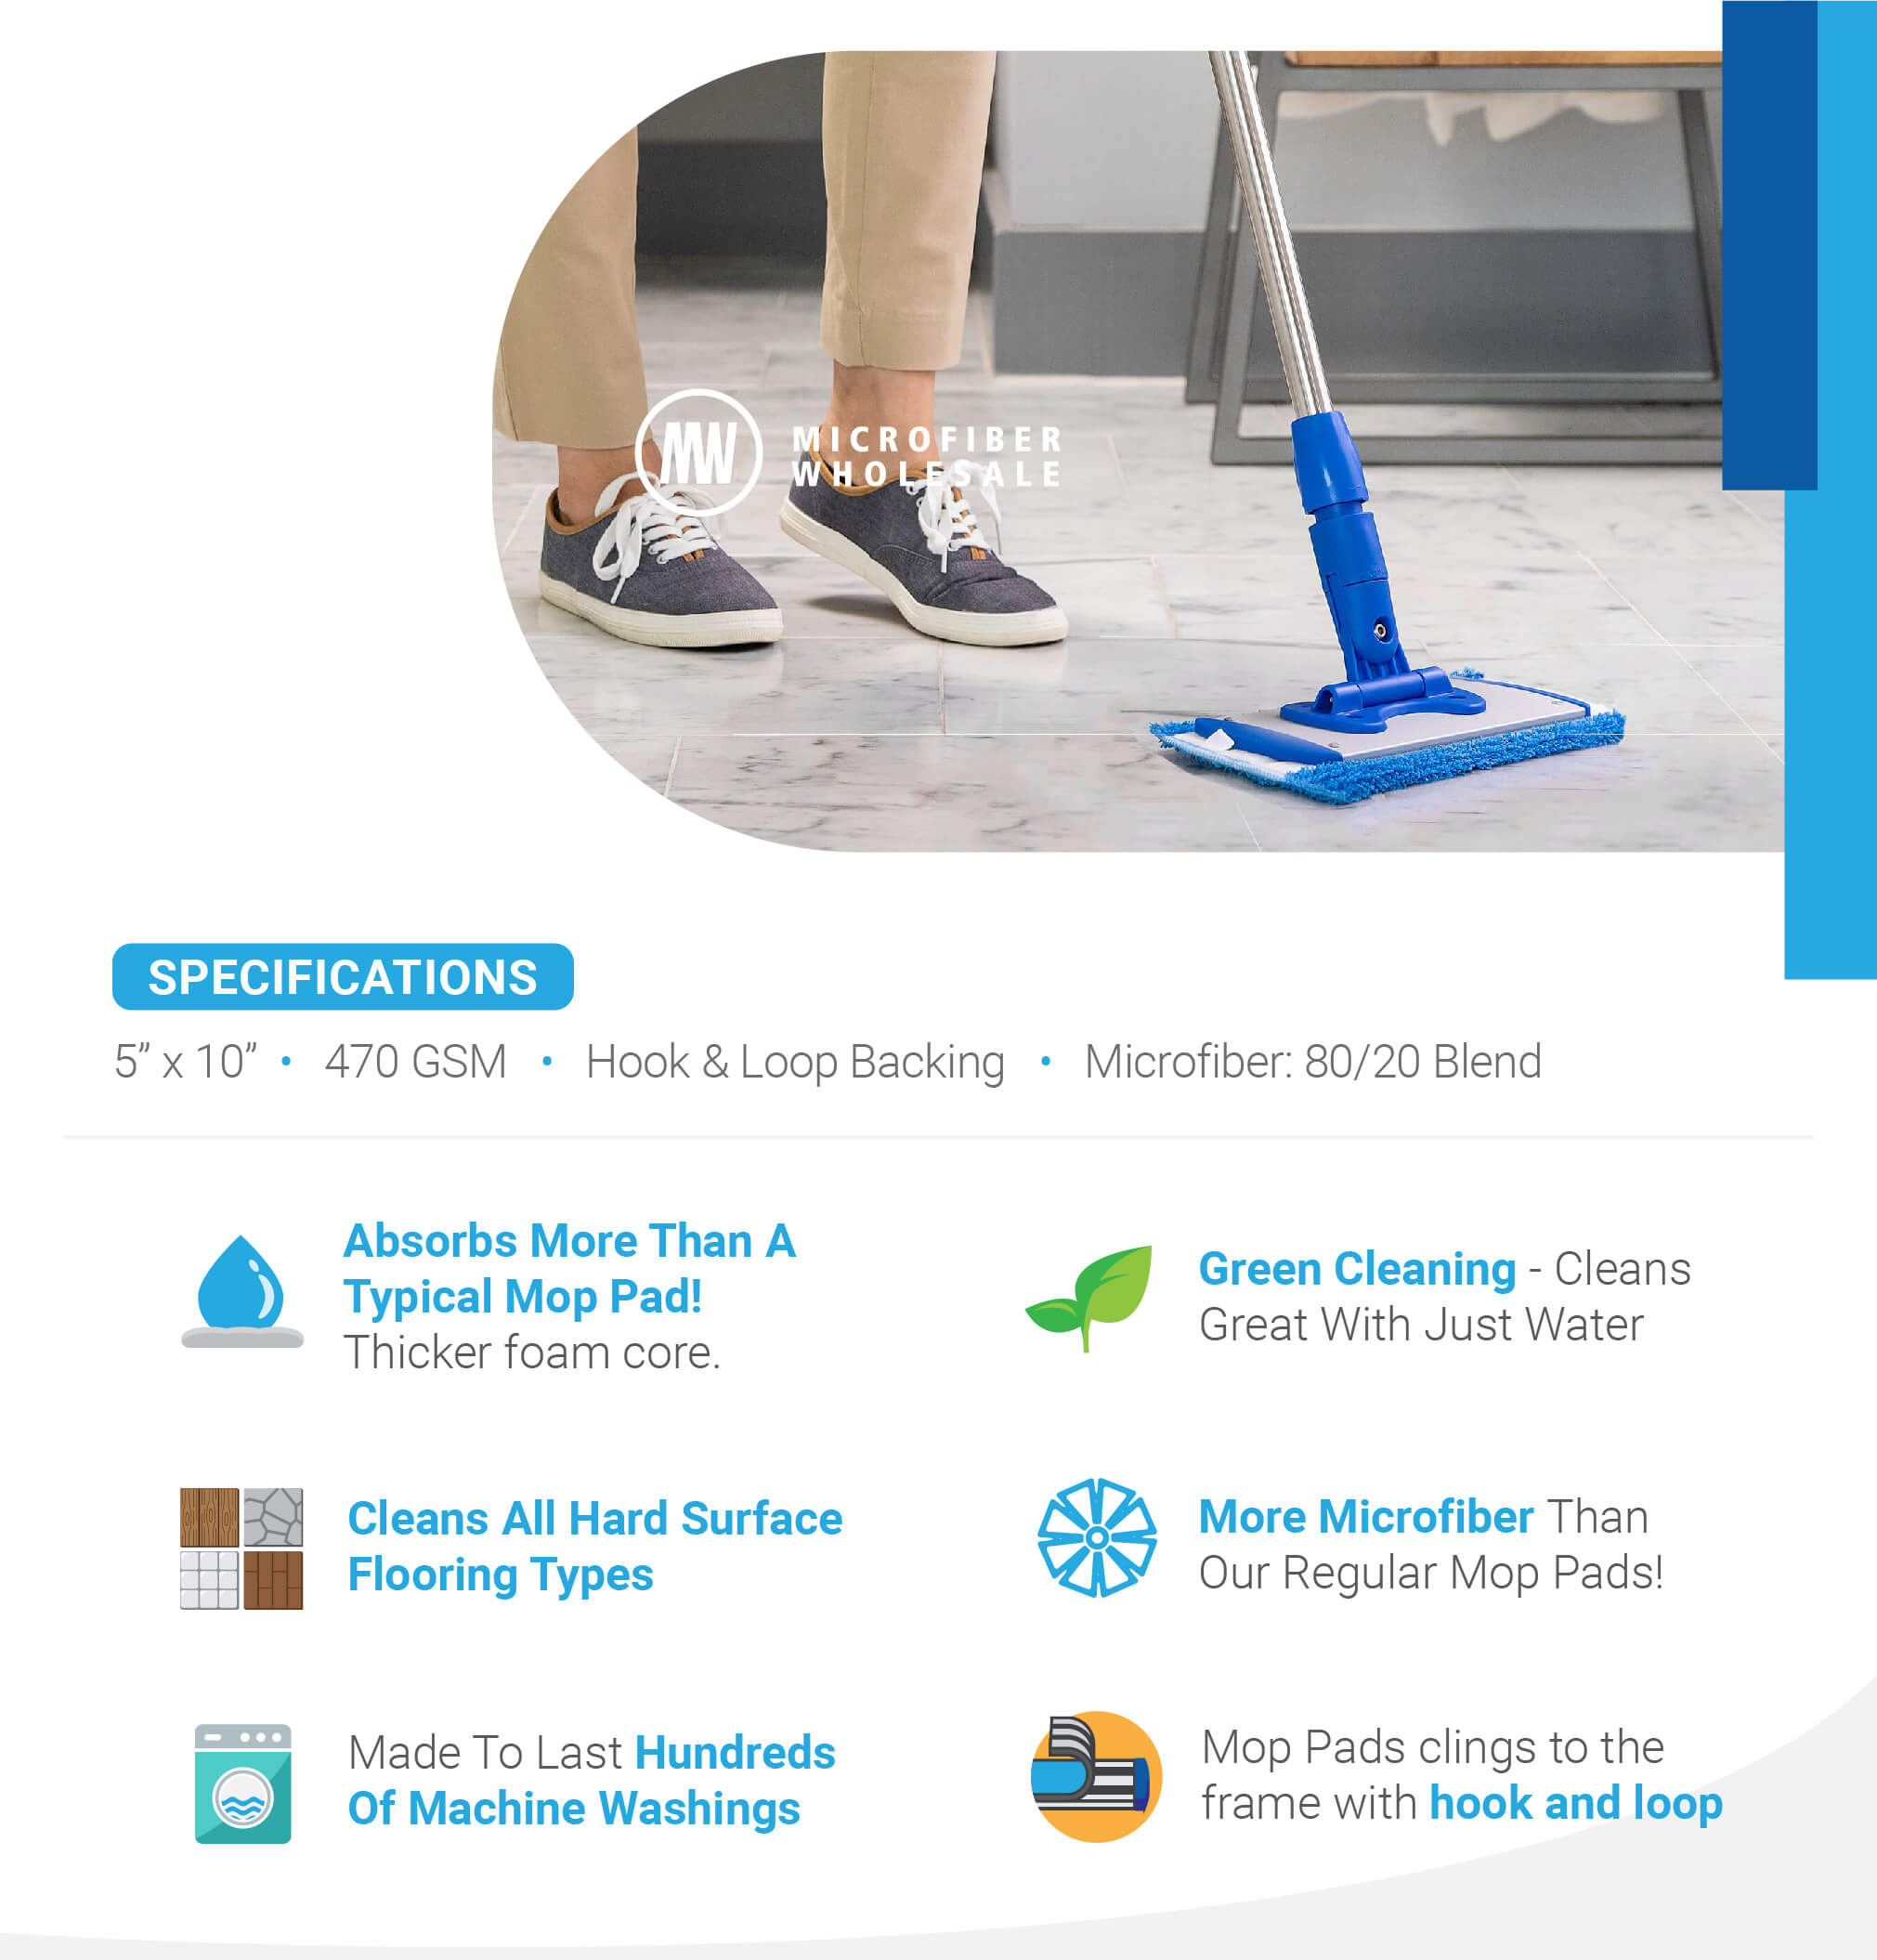 Baseboard Cleaner Tool With Handle No-Bending Mop With 2 Cleaning